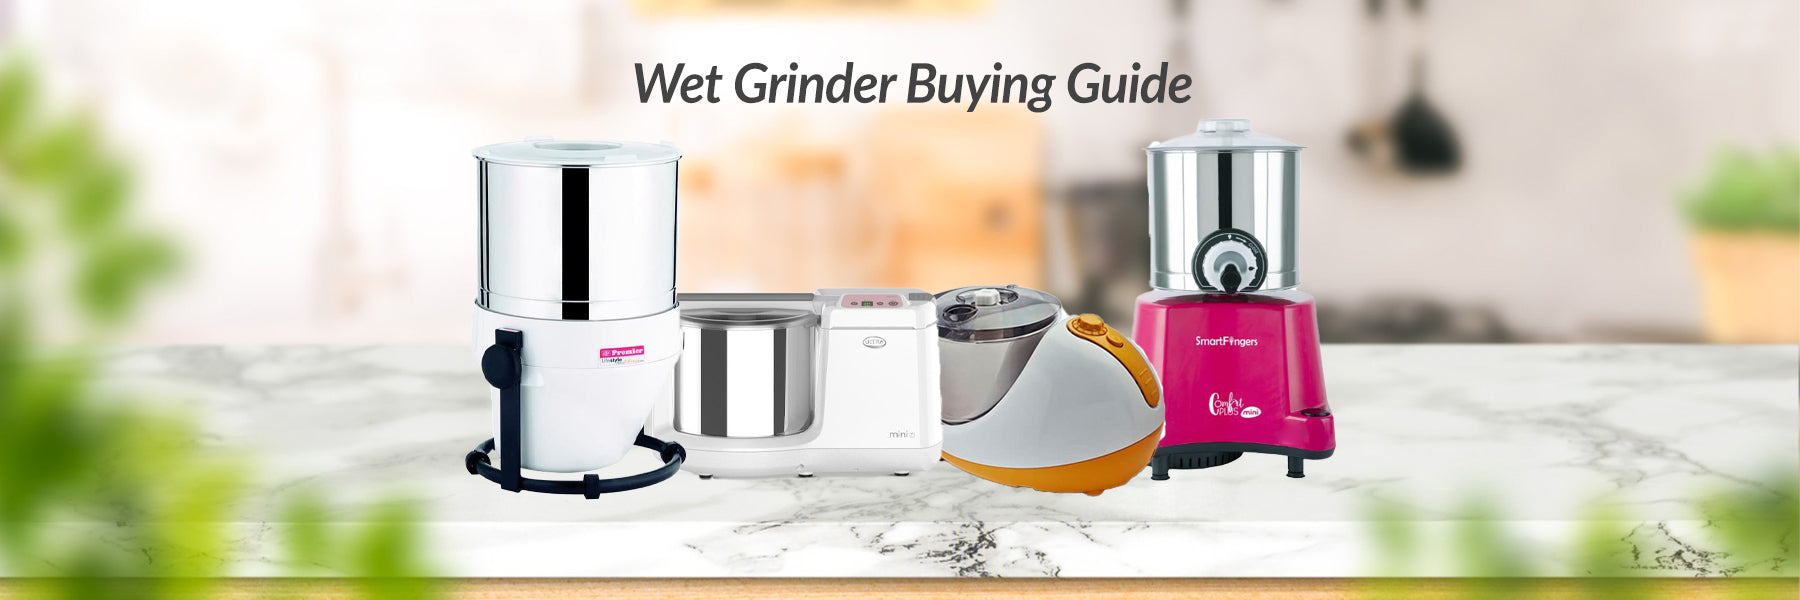 Wet Grinder Buying Guide FromIndia.com